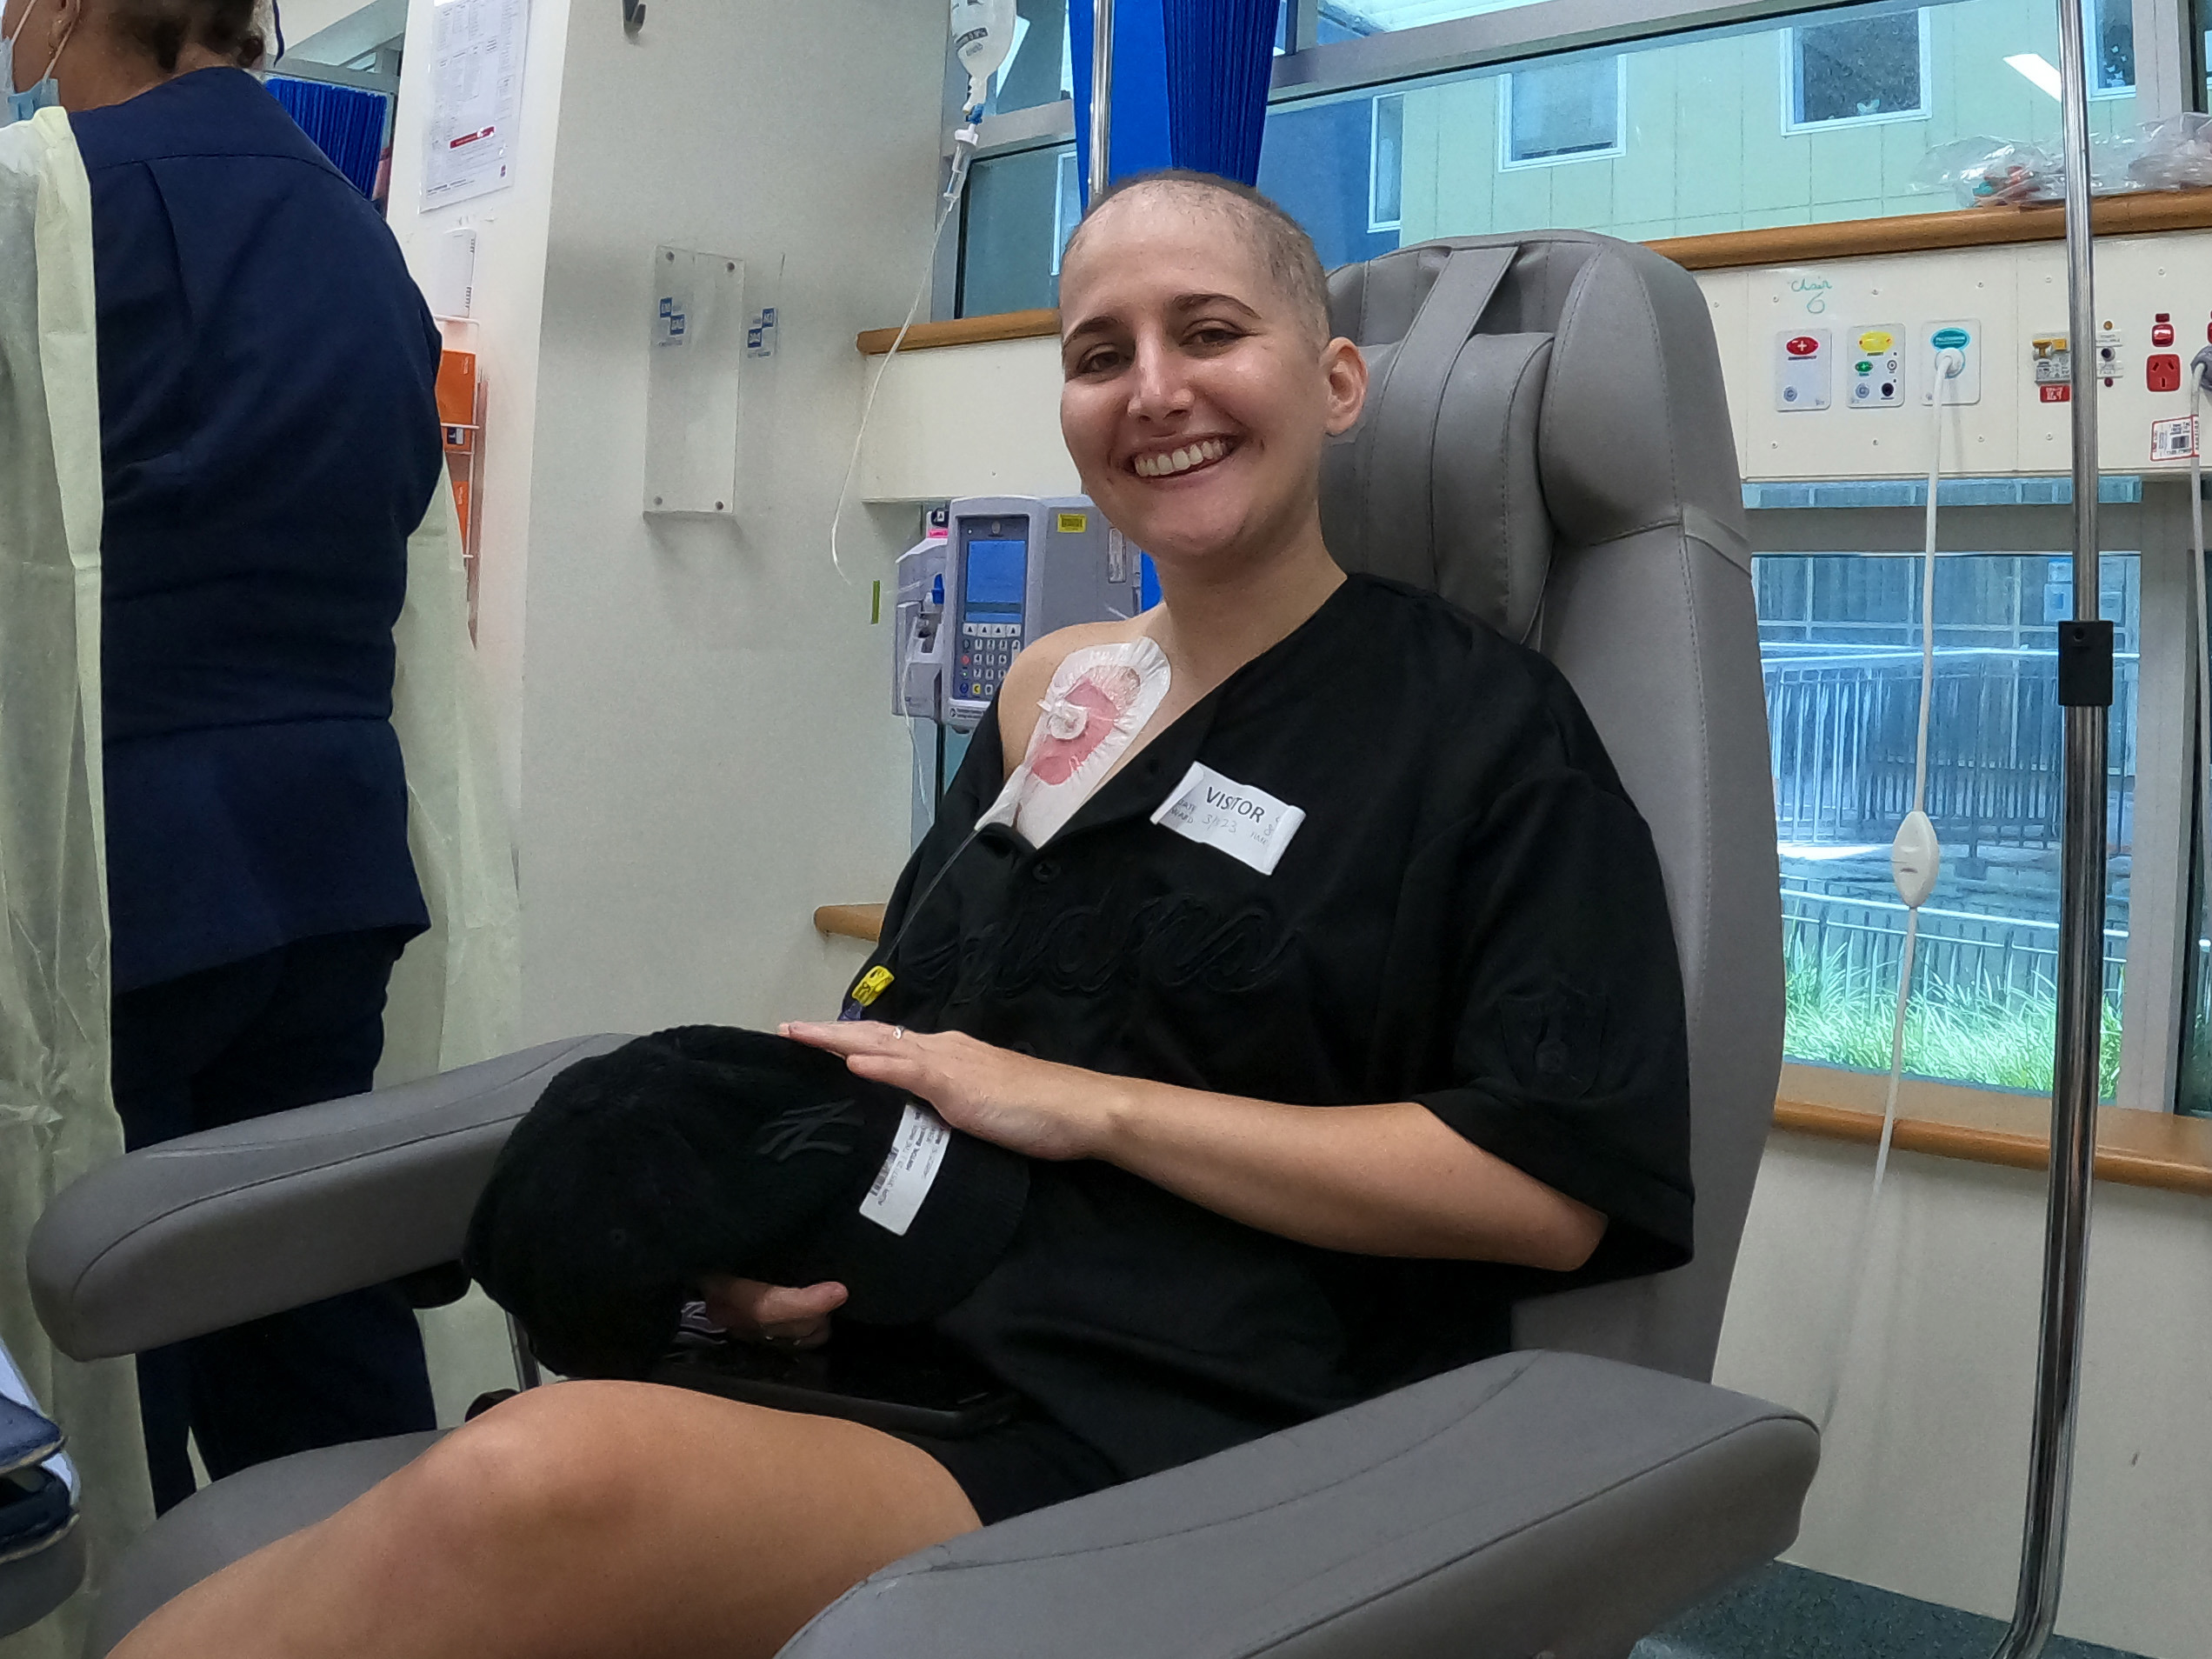 B﻿ianca Hinton, 25, was on a cruise with her family when she felt a lump in her breast while getting dried after a shower.She thought it was probably a cyst, but headed to her GP as soon as she could.﻿
Just a few weeks later, she was starting chemotherapy for breast cancer.﻿